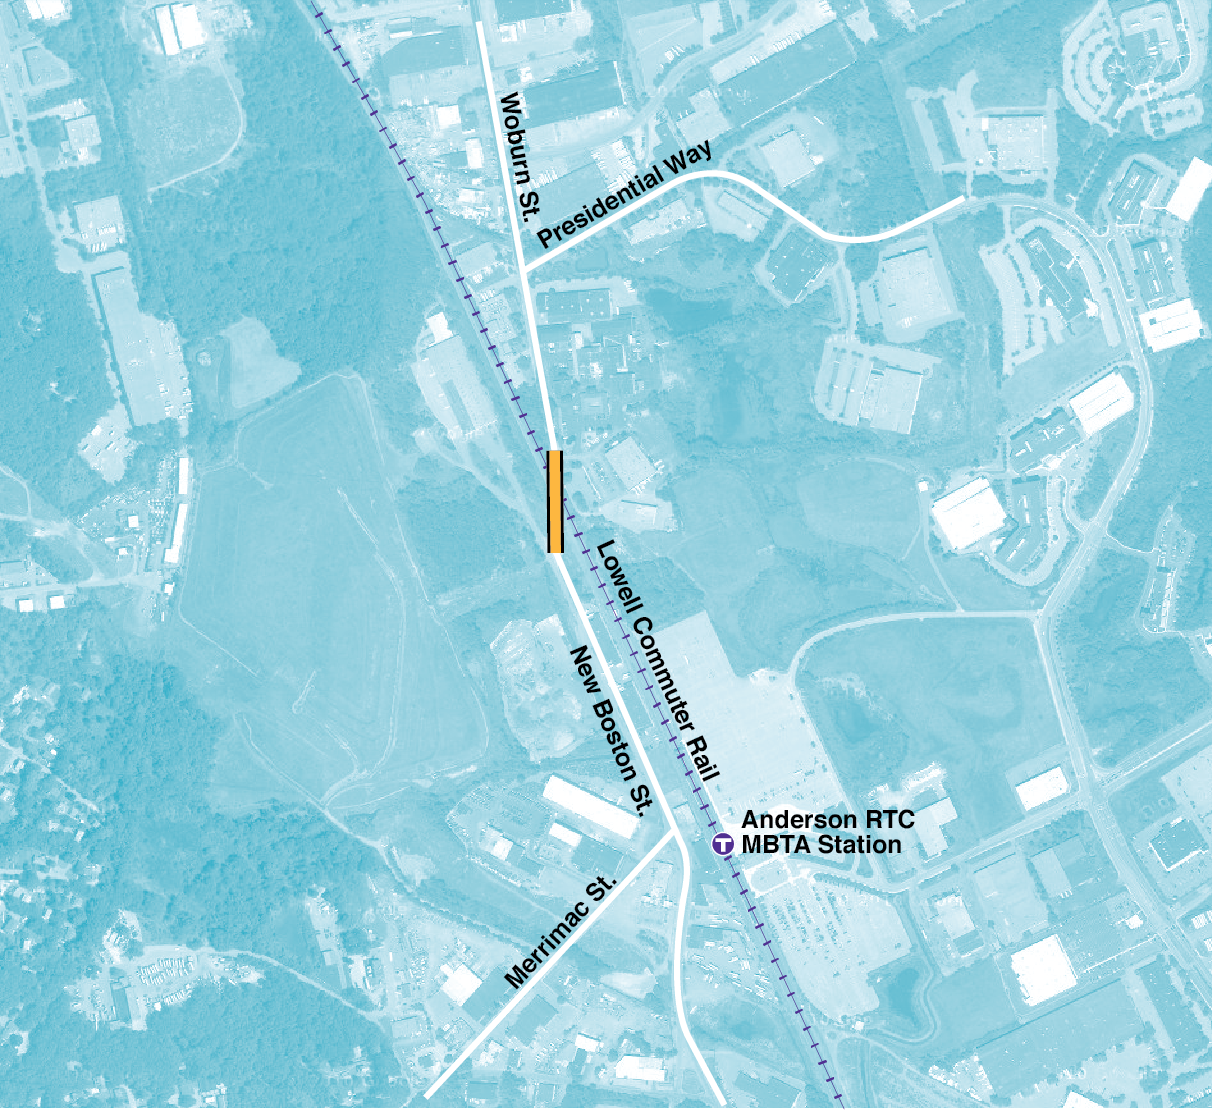 Figure 4-10. Bridge Replacement, New Boston Street Over MBTA Project Area
Figure 4-10 is a map of the Lowell commuter rail line, Anderson Regional Transportation Center, Merrimac Street, Woburn Street, New Boston Street, and Presidential Way.
